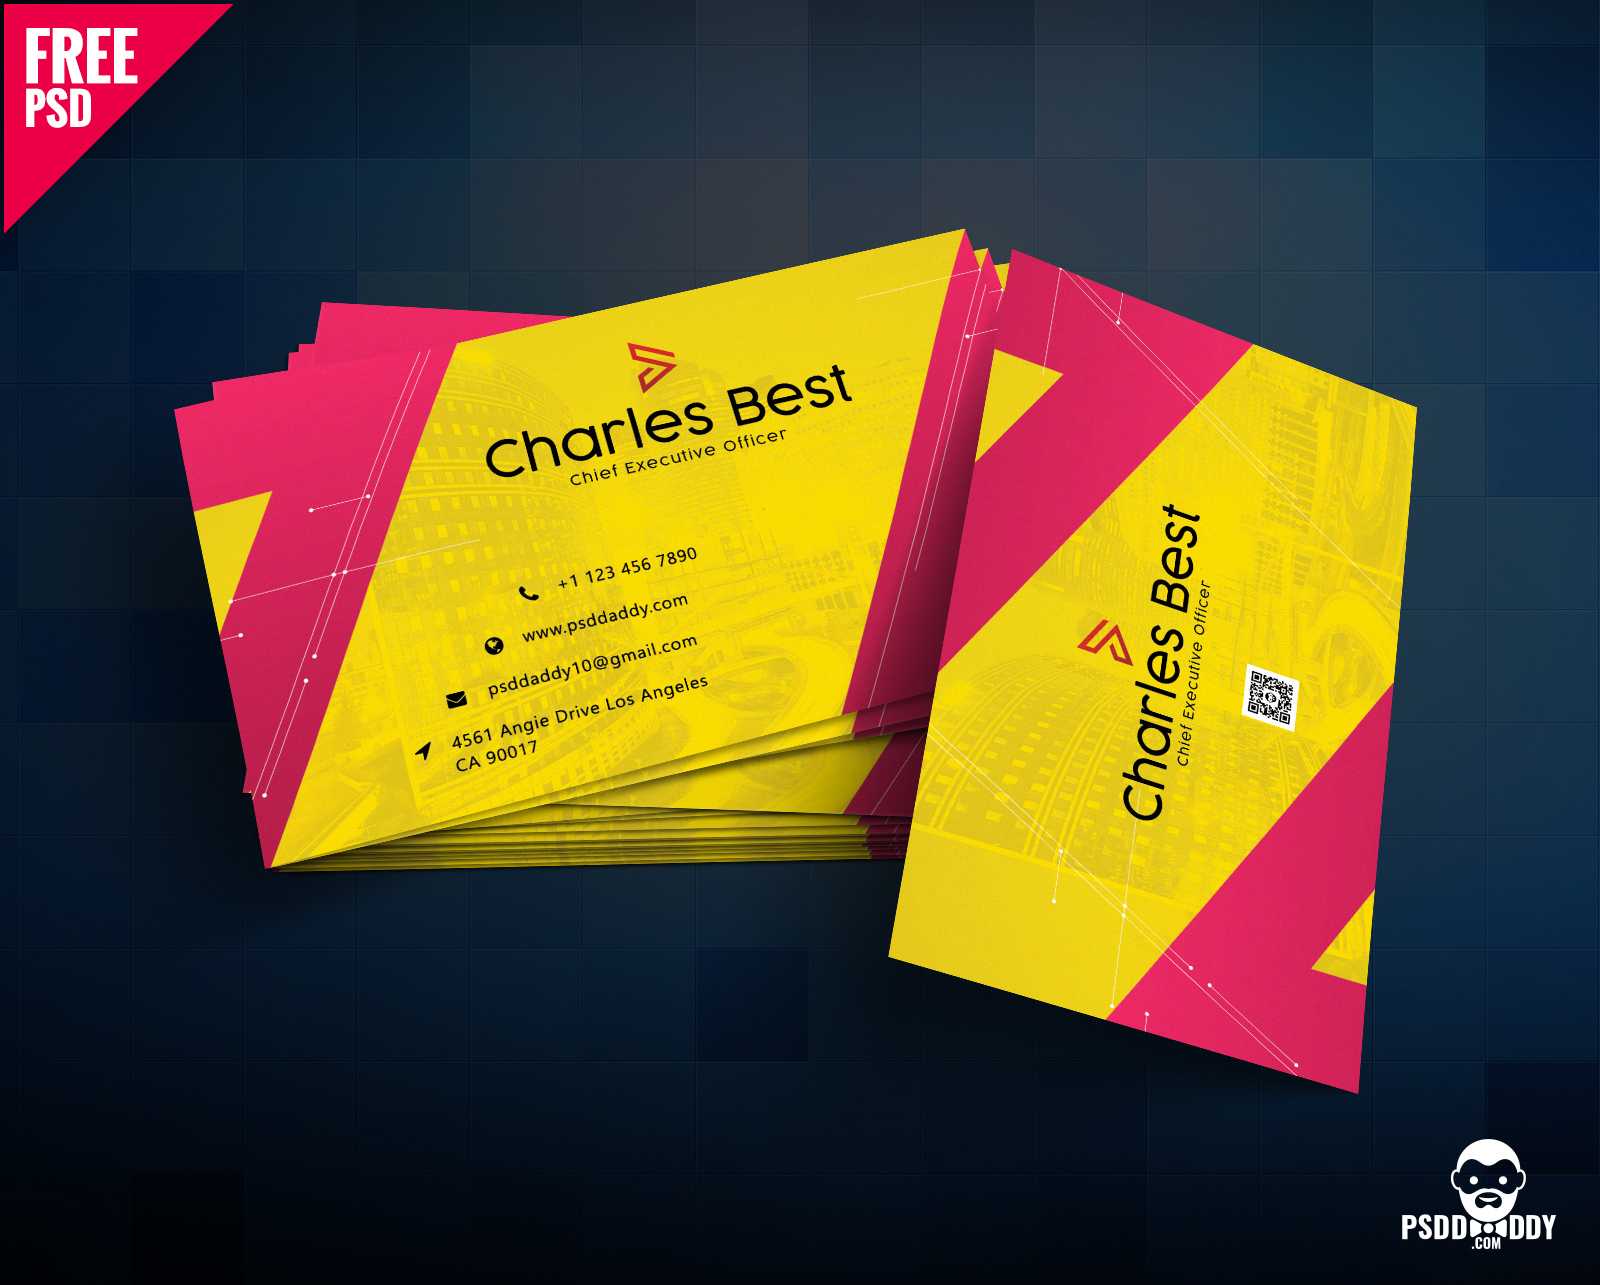 Download] Creative Business Card Free Psd | Psddaddy For Name Card Template Photoshop